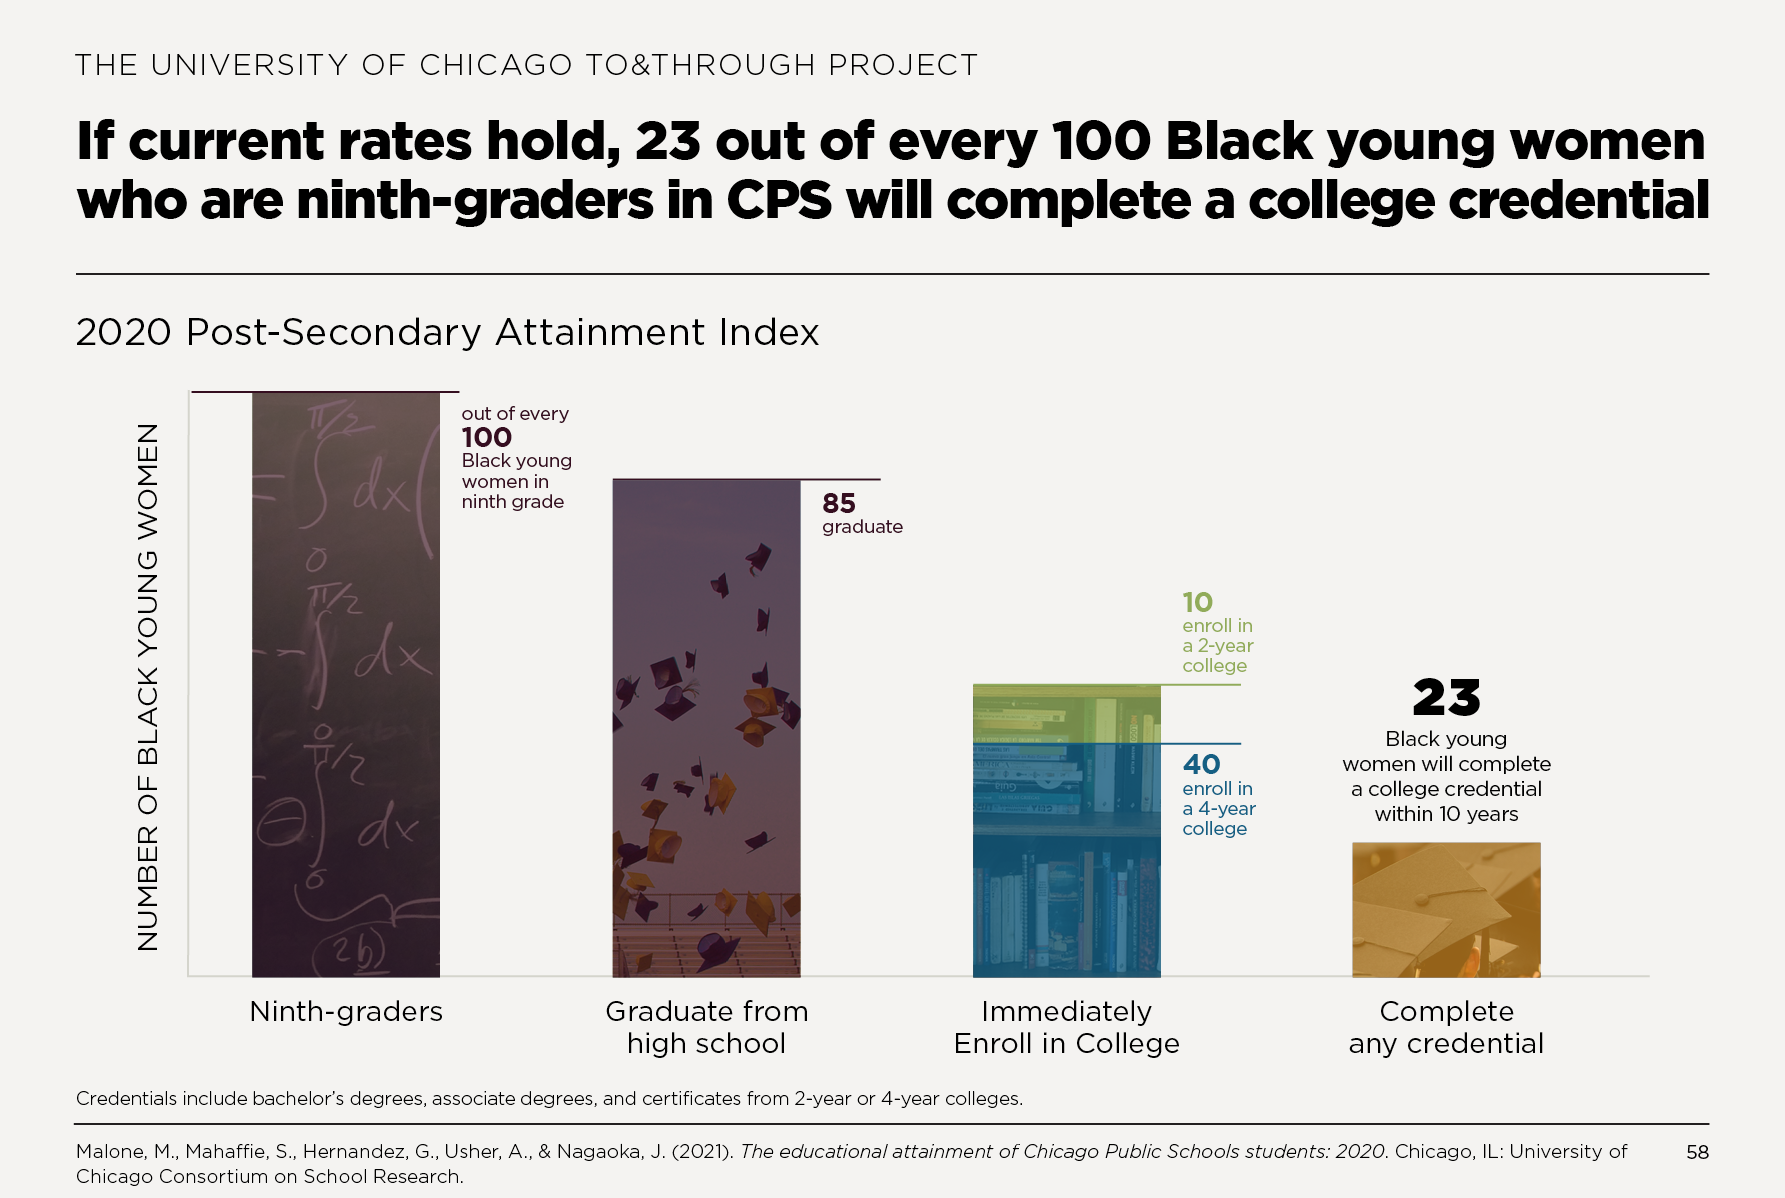 If current rates hold, 23 out of every 100 Black young women who are ninth-graders in CPS will complete a college credential within 10 years